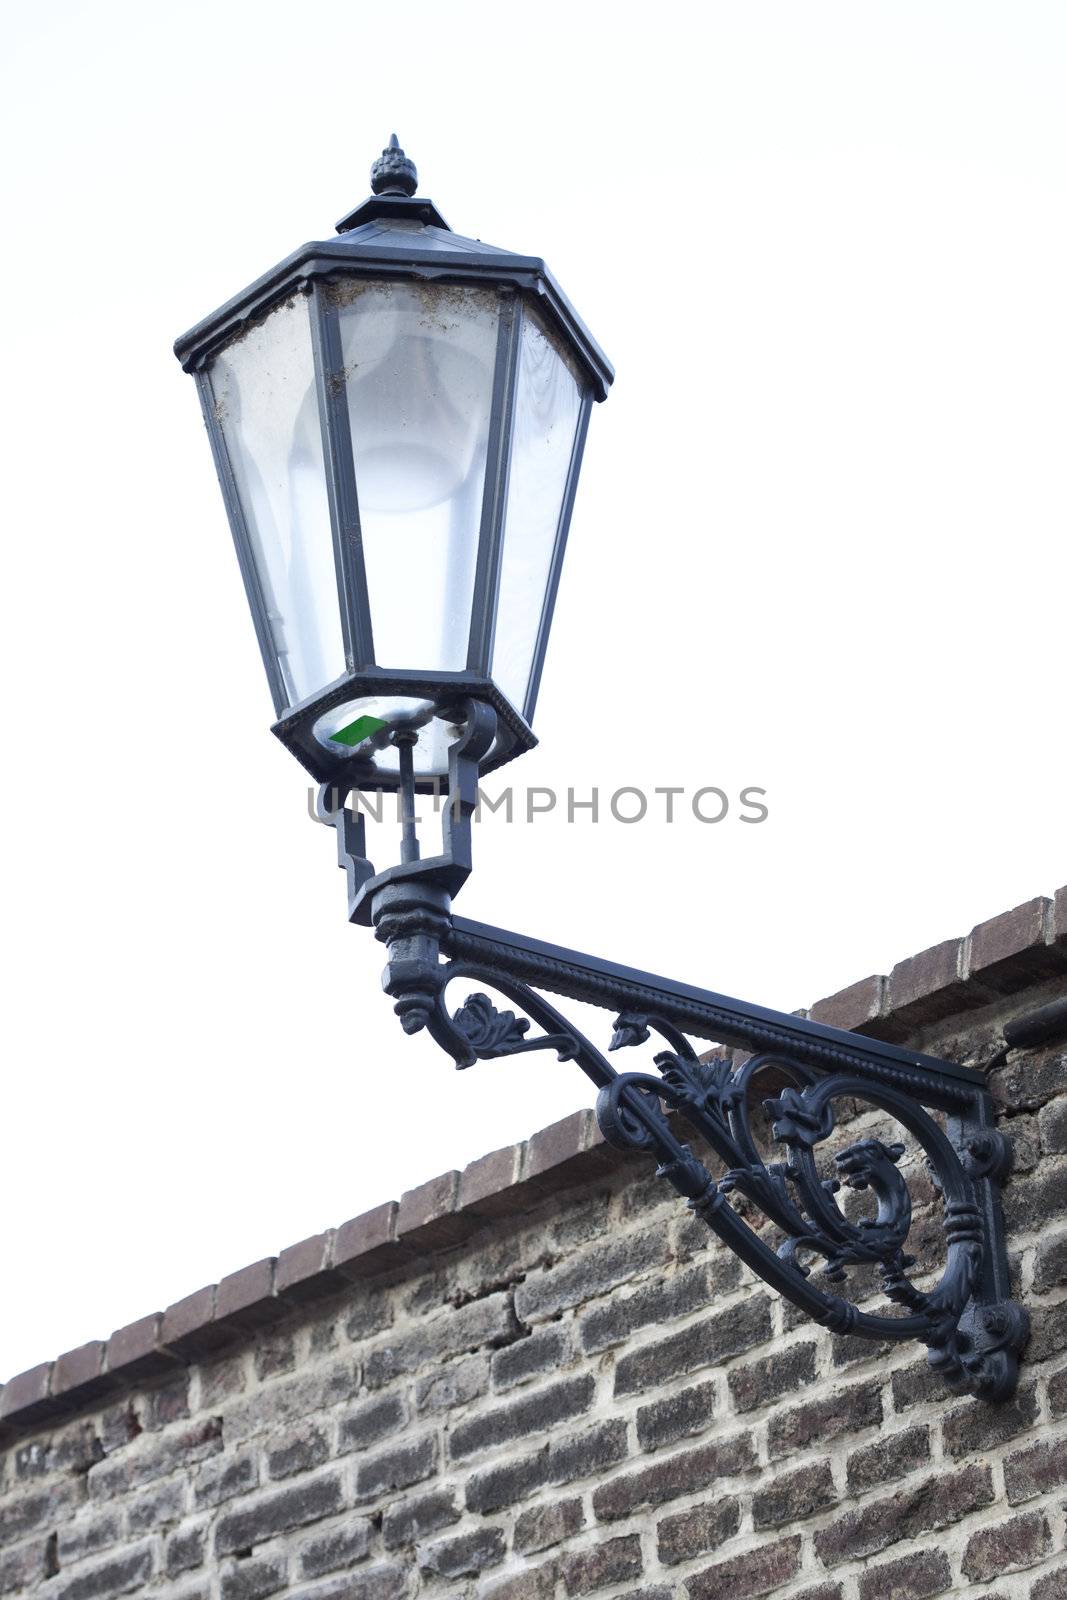 old lantern on a brick wall by jannyjus